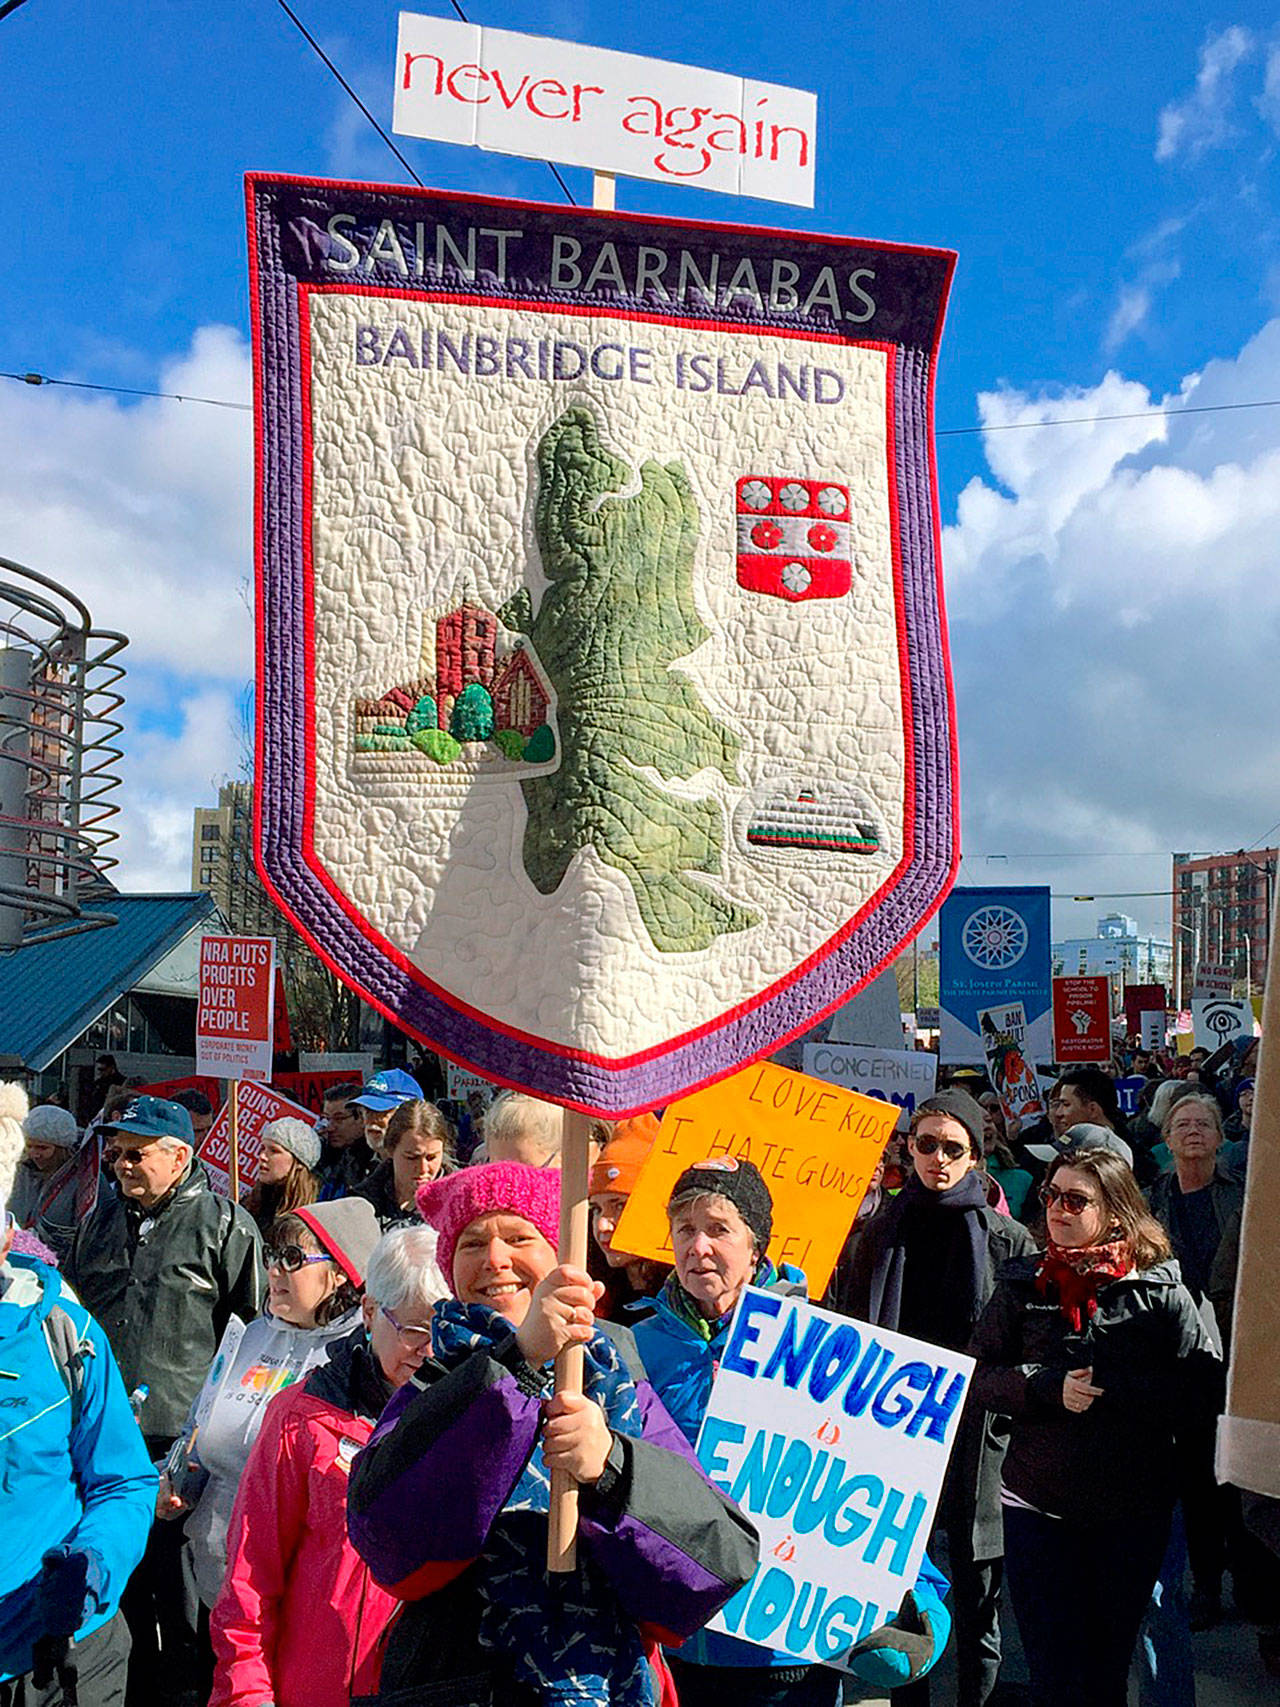 St. Barnabas steps out for March for Our Lives